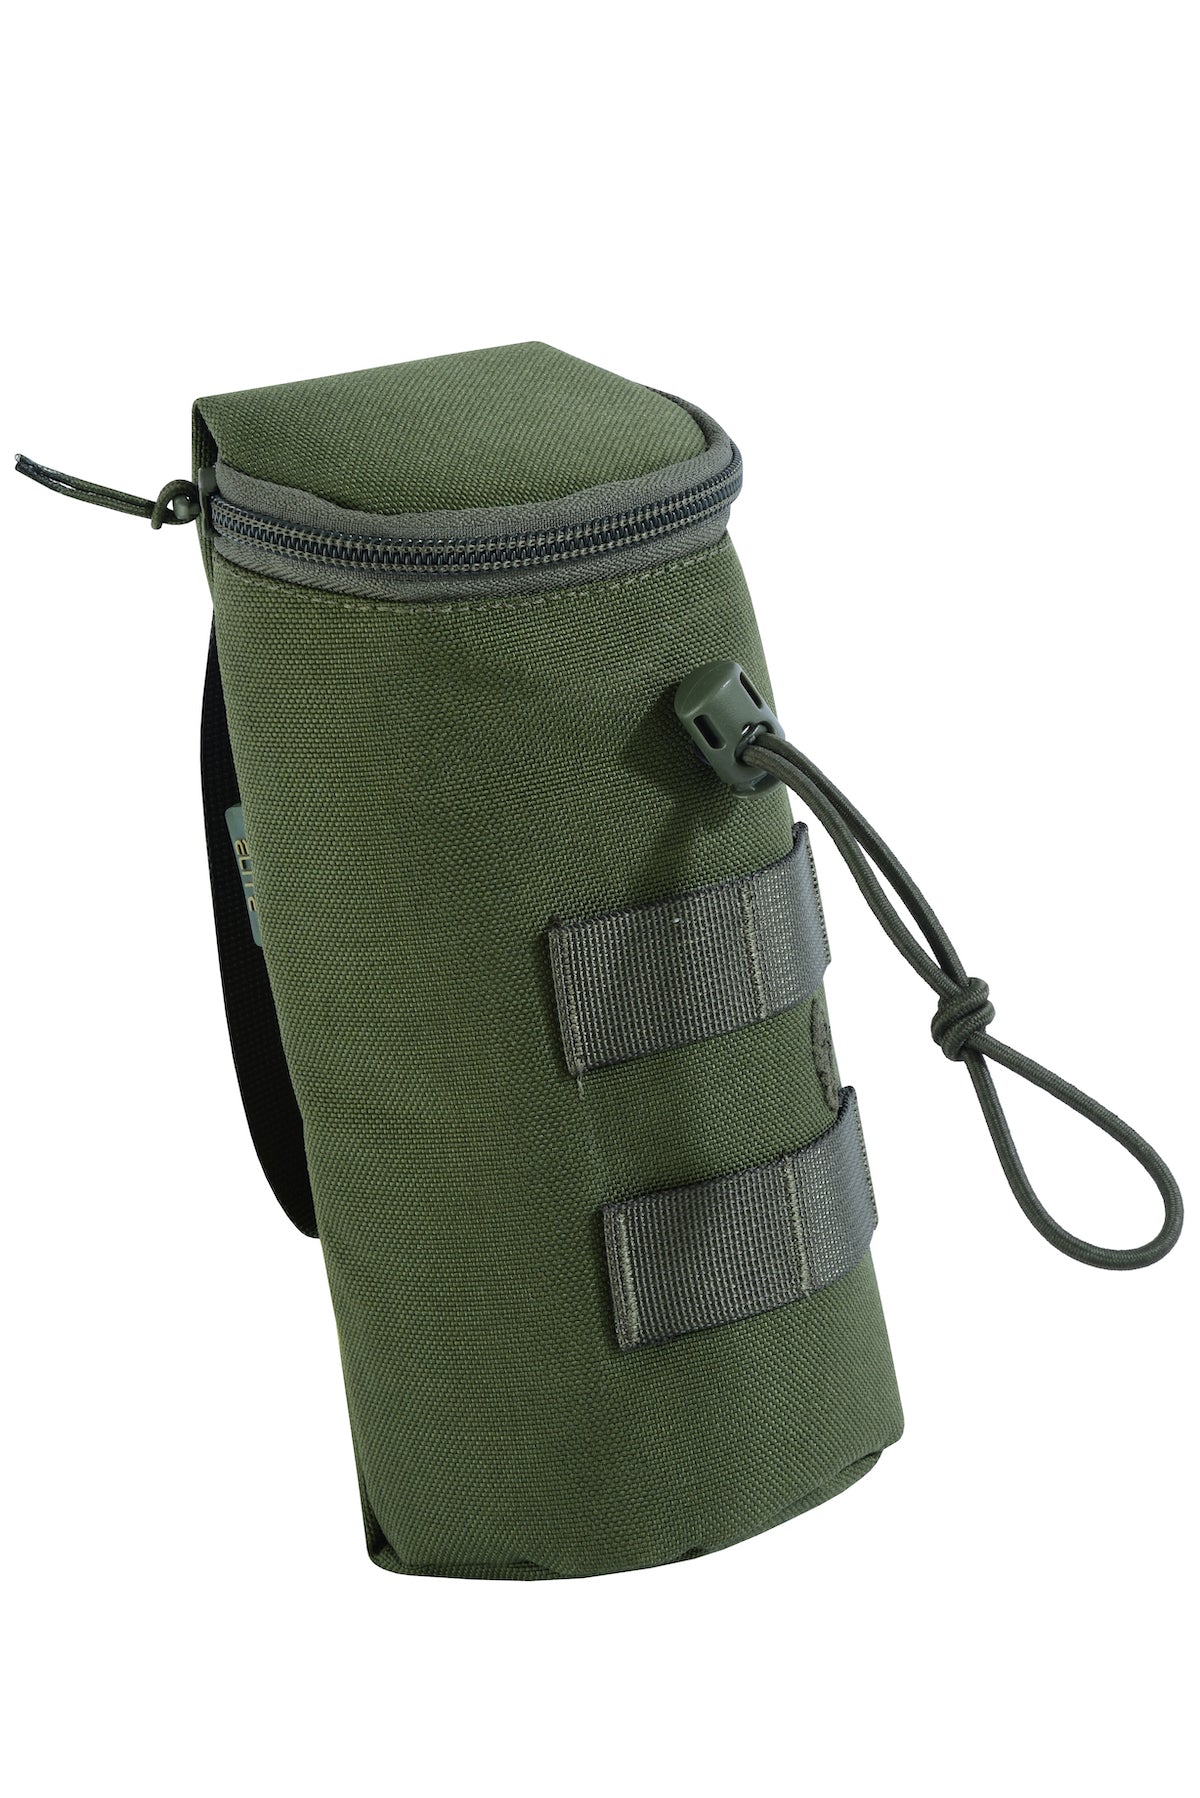 SHE-21037 Insulated water bottle holder OLIVE GREEN